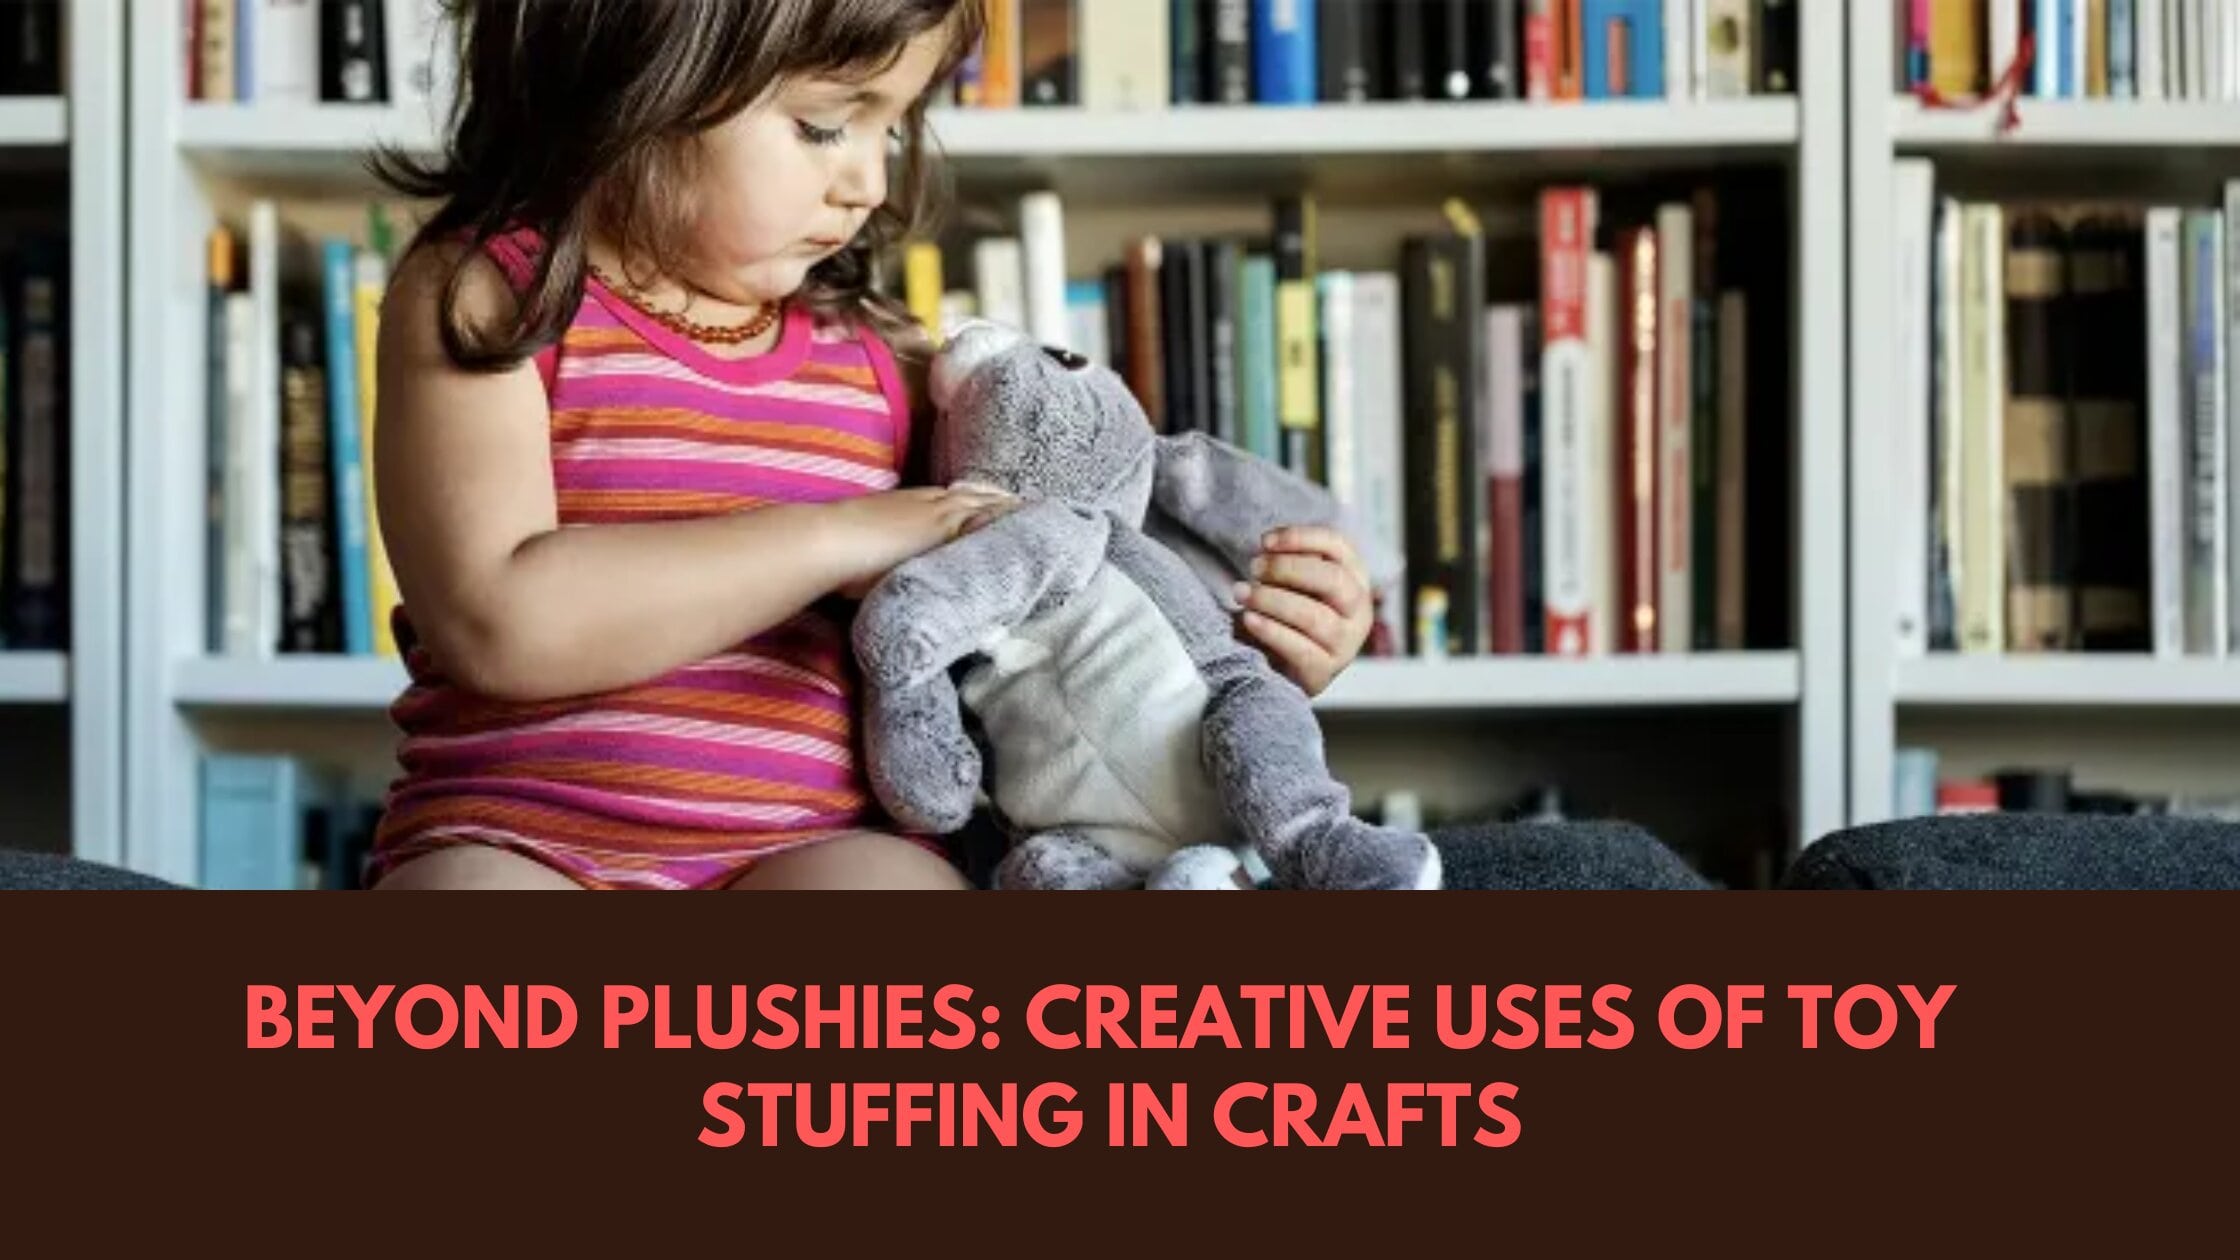 Beyond Plushies: Creative Uses of Toy Stuffing in Crafts